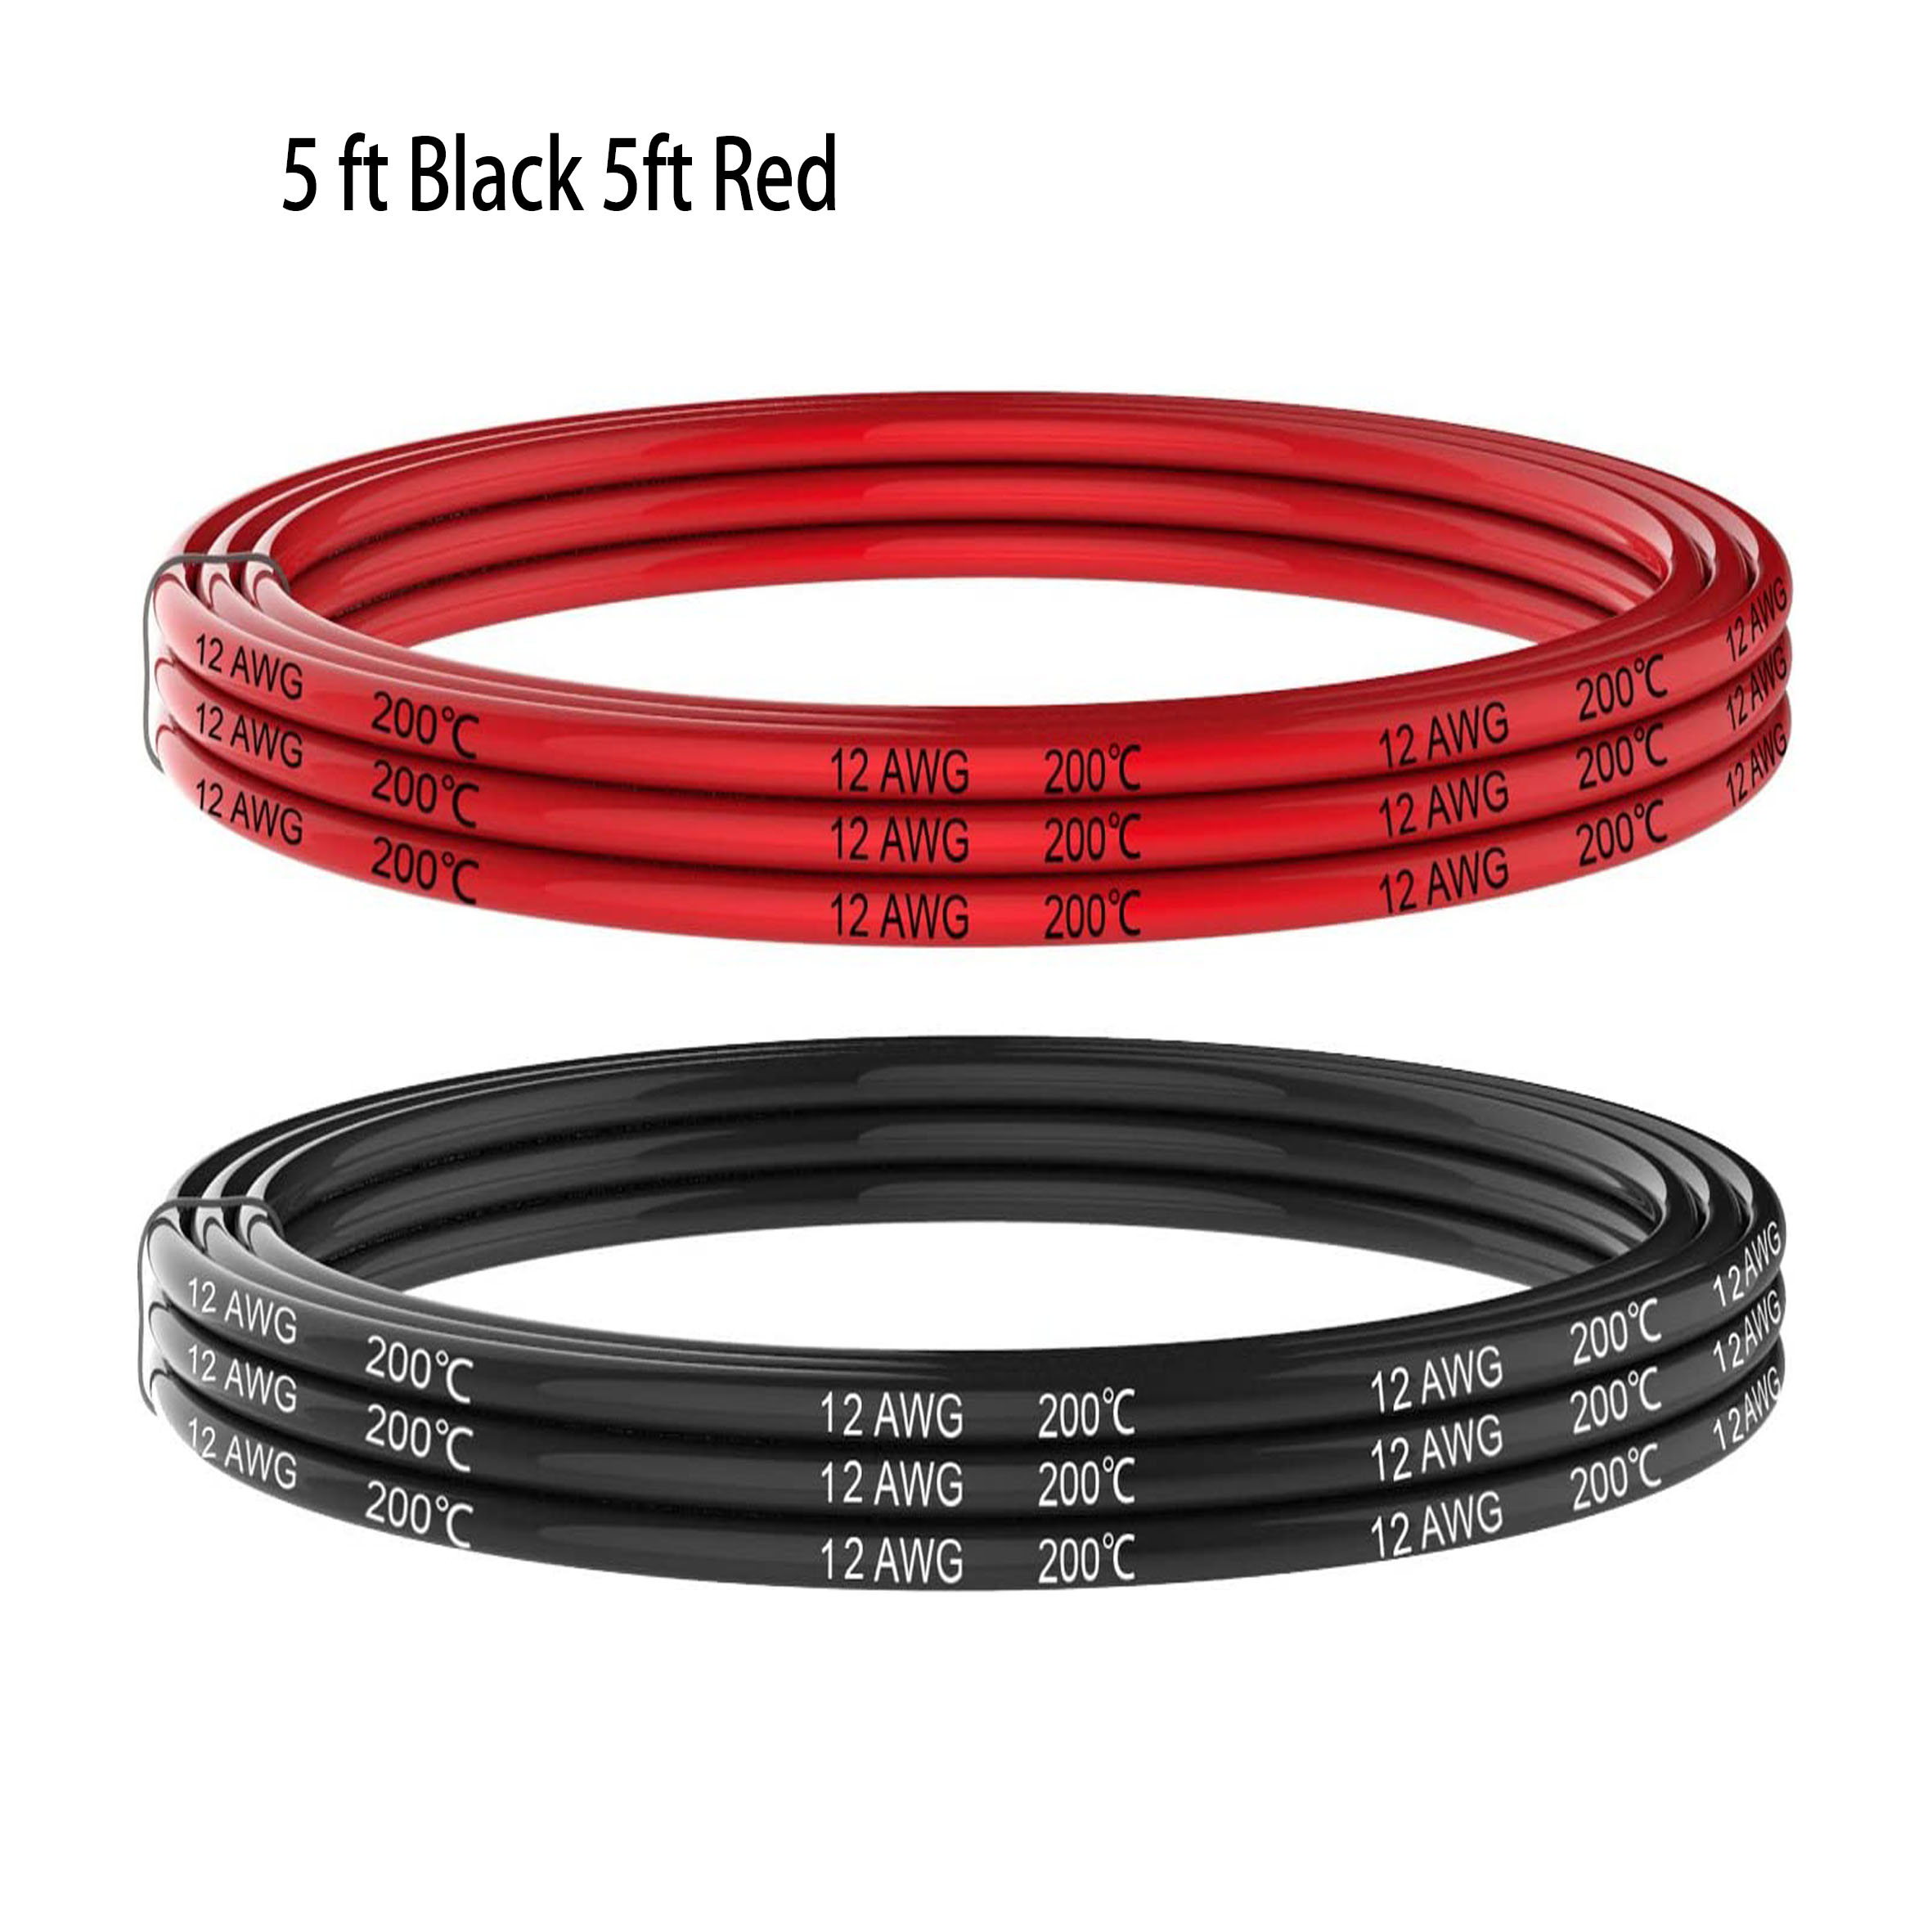 8 GAUGE Stranded Copper Wire 5 FT Red and 5 FT Black Flexible Silicone  Rubber 8 AWG wire (5 Feet)